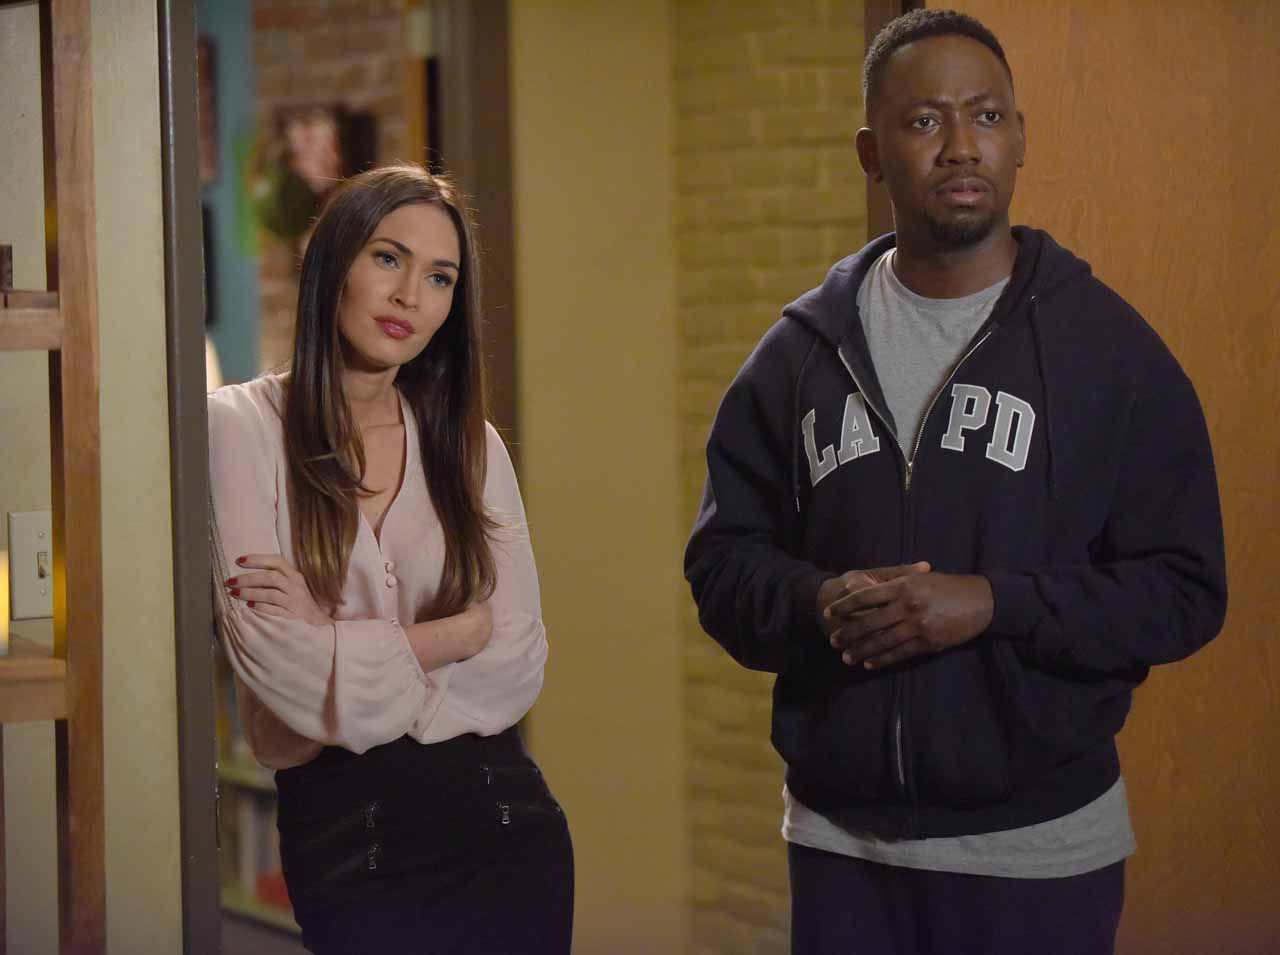 NEW GIRL: L-R: Guest star Megan Fox and Lamorne Morris in the "Reagan" episode of NEW GIRL airing Tuesday, Feb. 9 (8:00-8:30 PM ET/PT) on FOX. Â©2016 Fox Broadcasting Co. Cr: Ray Mickshaw/FOX